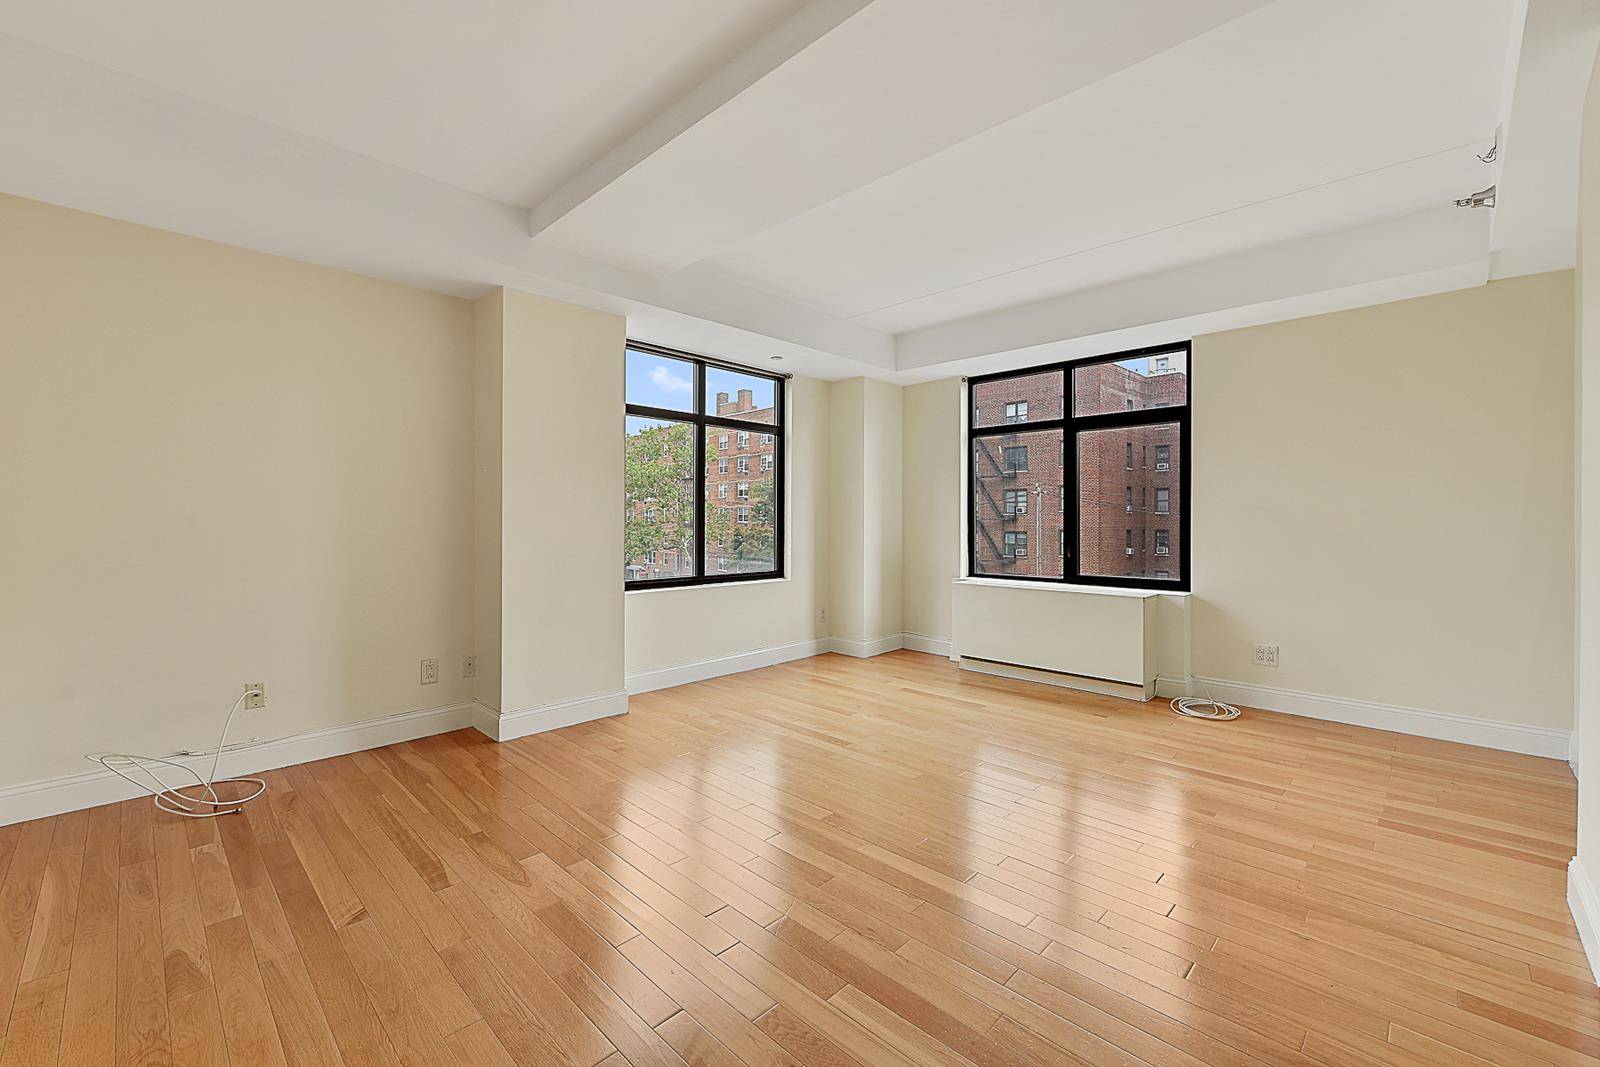 High floor and new construction 3 bedroom, 2 bathroom condominium apartment in central Riverdale.